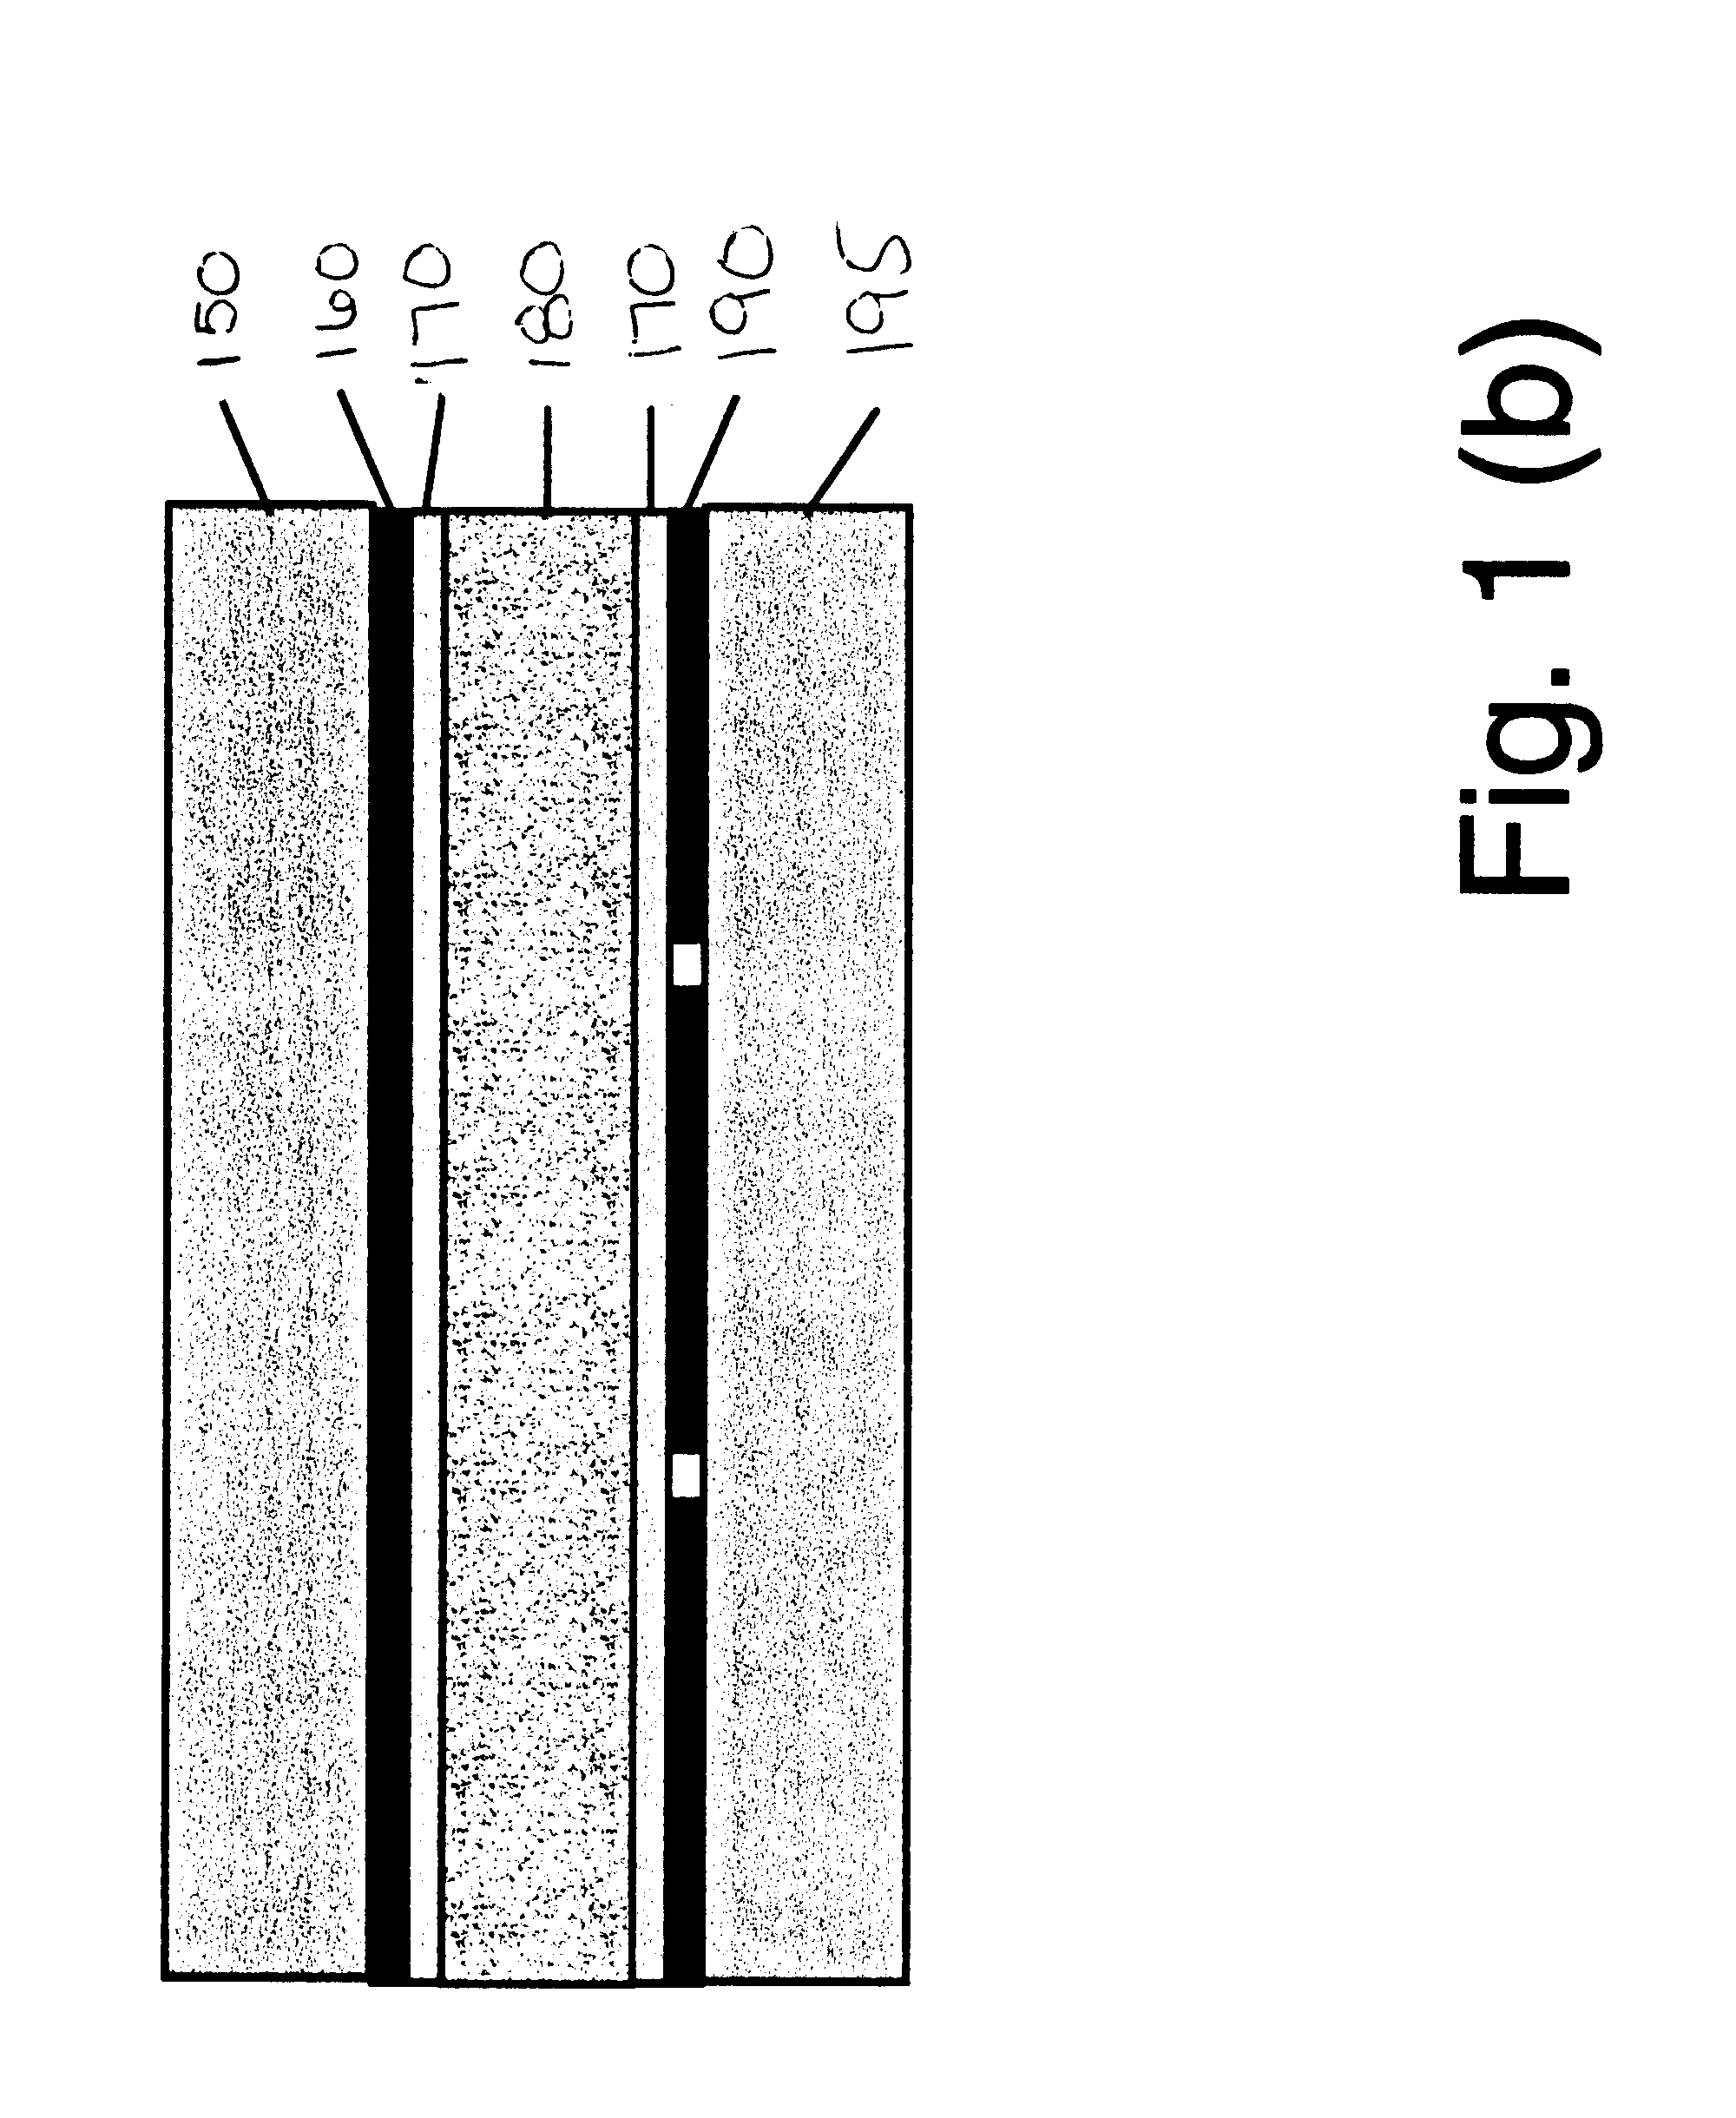 Vertical aligned liquid crystal display and method using dry deposited alignment layer films